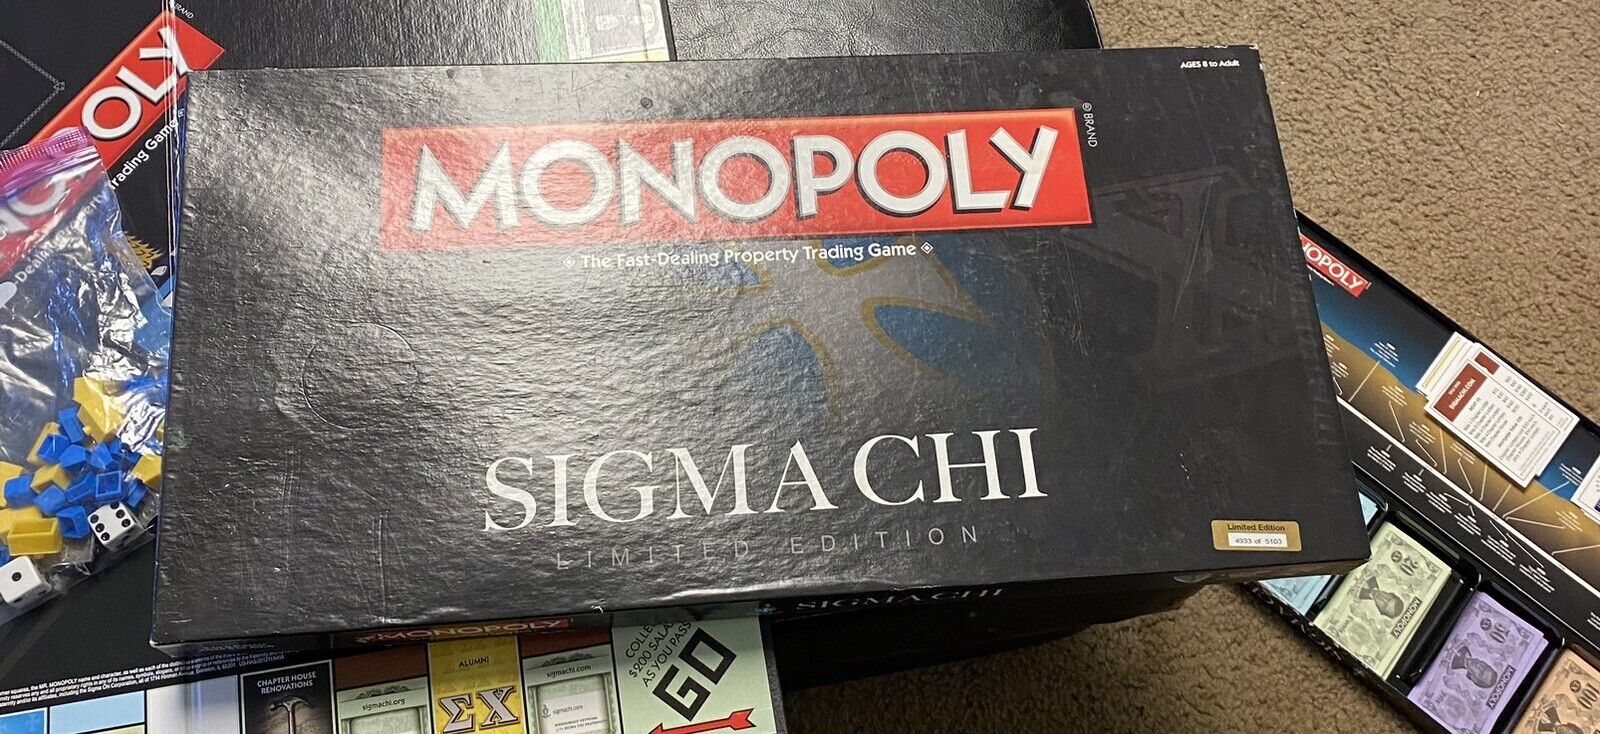 Monopoloy Sigma Chi Limited Edition Used Set #4933